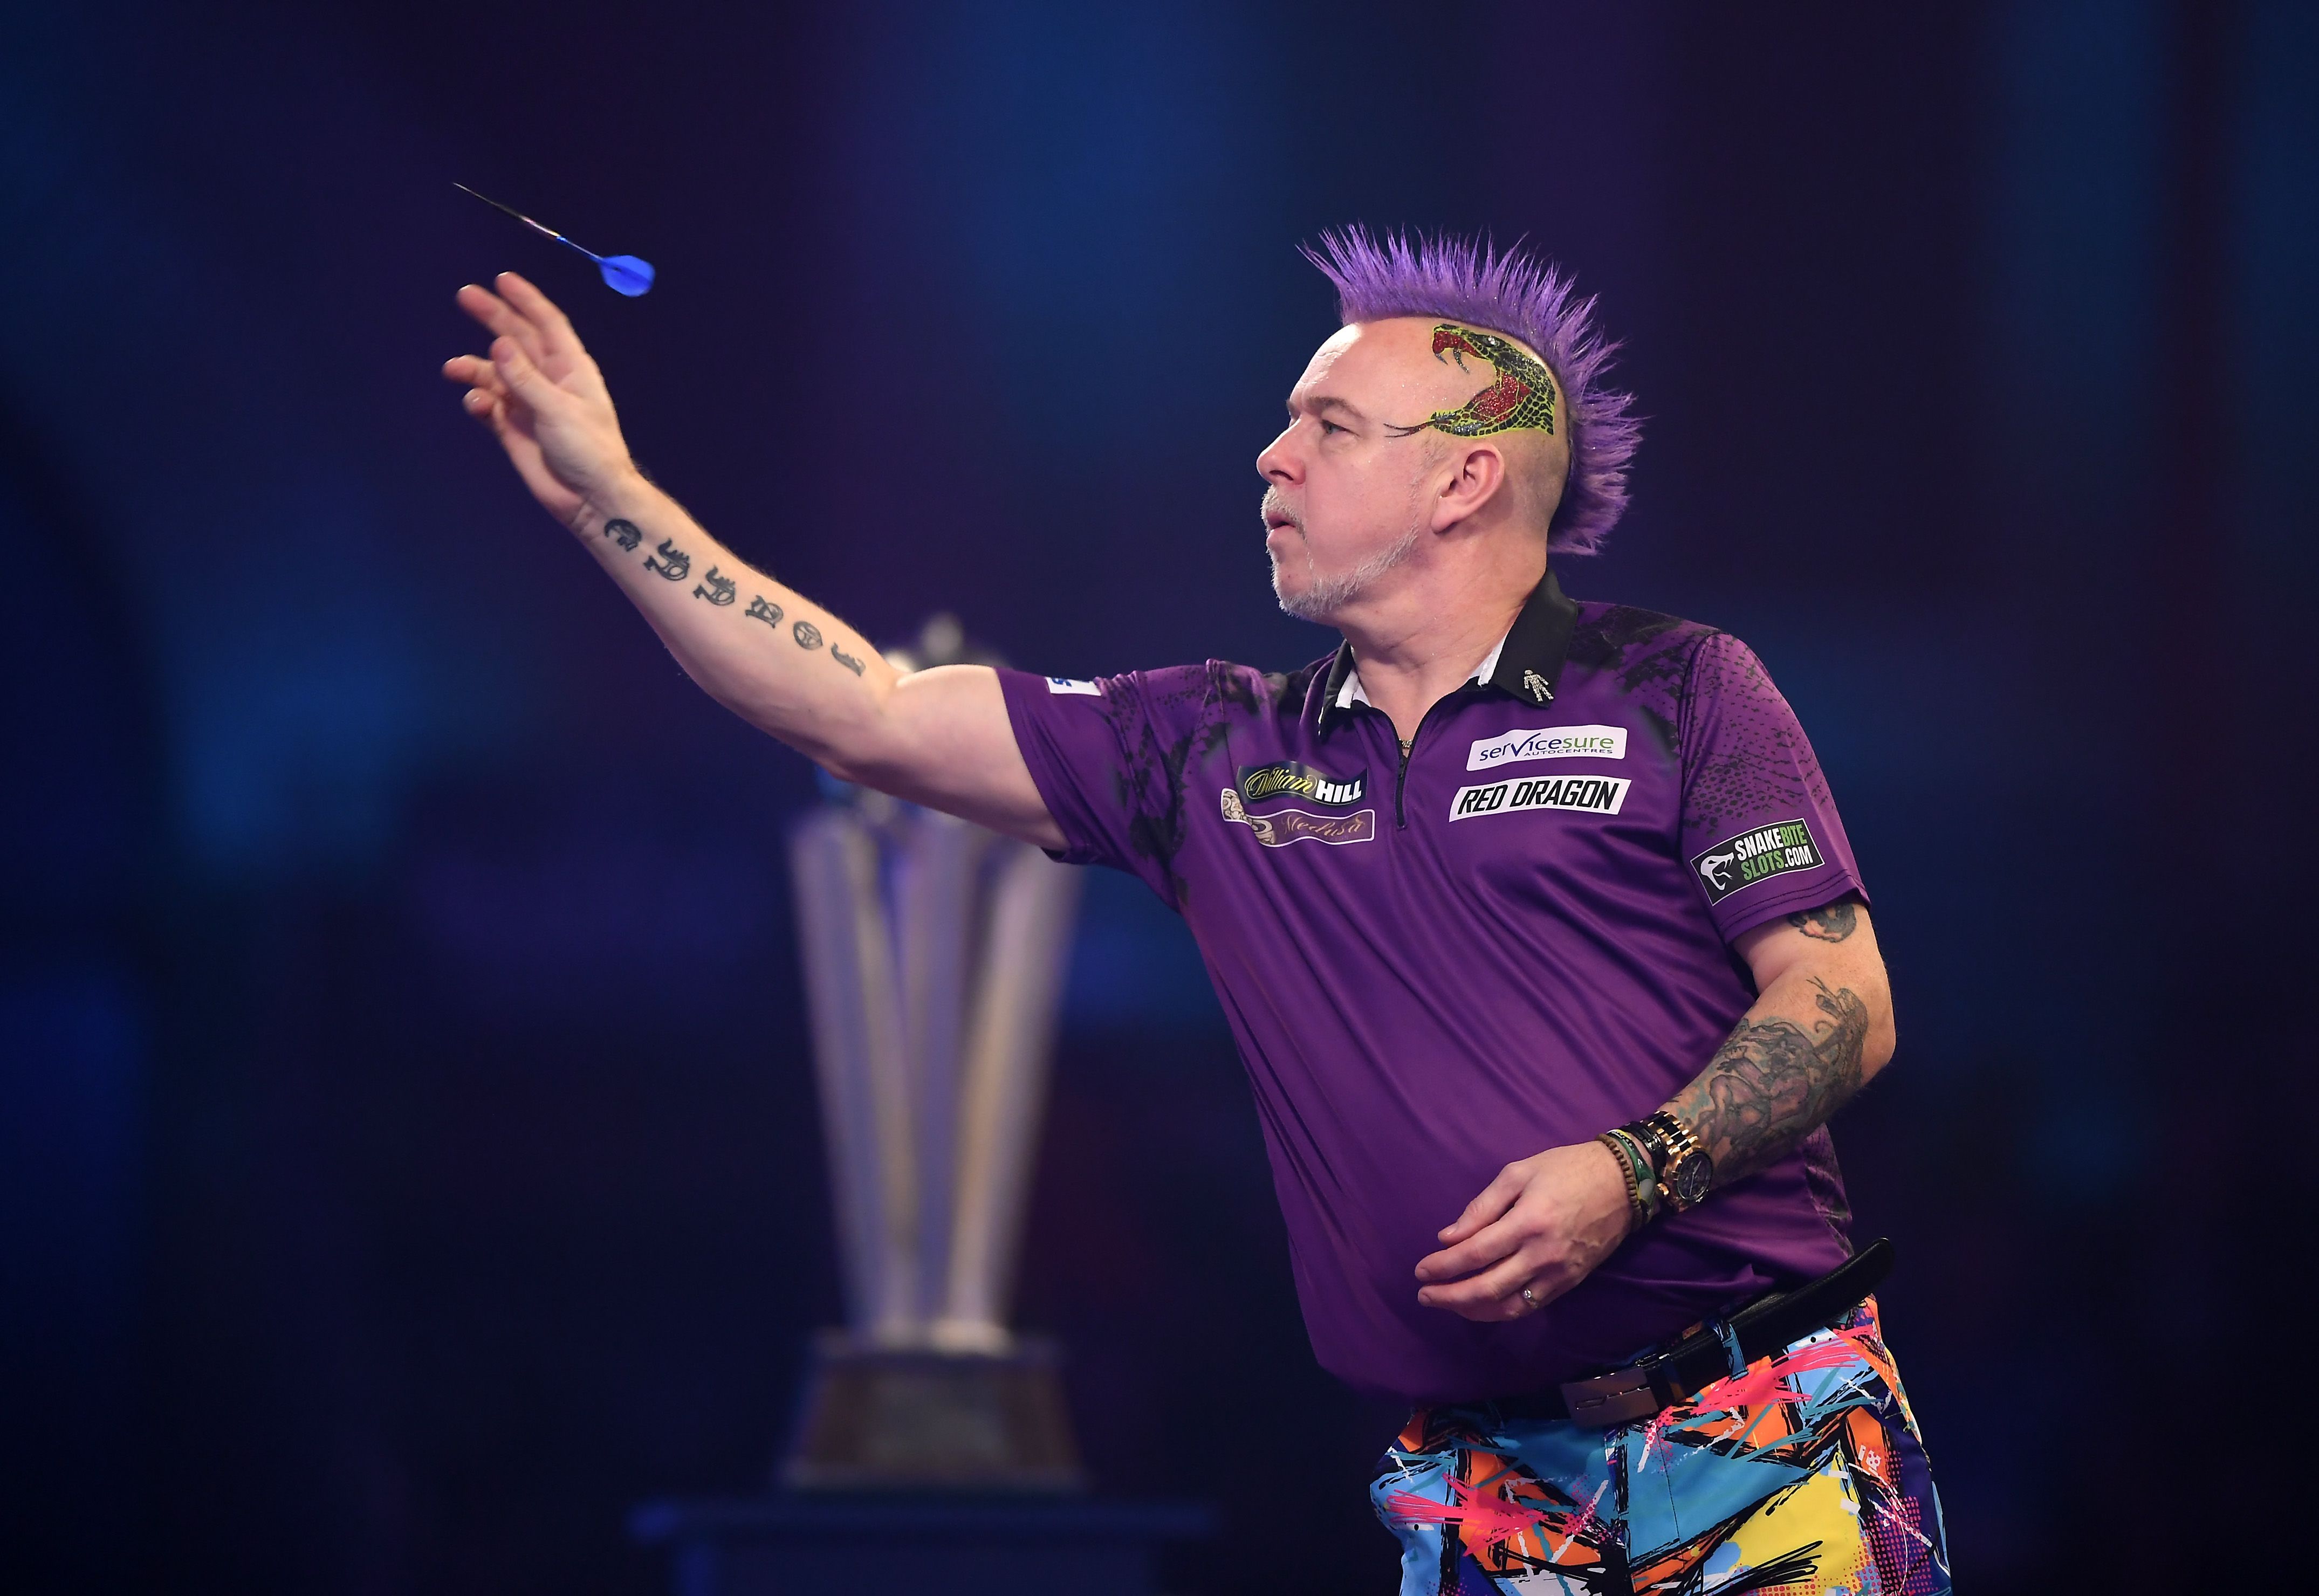 Joe Cullen vs Peter Wright Predictions, Betting Tips & Odds │17 MARCH, 2022